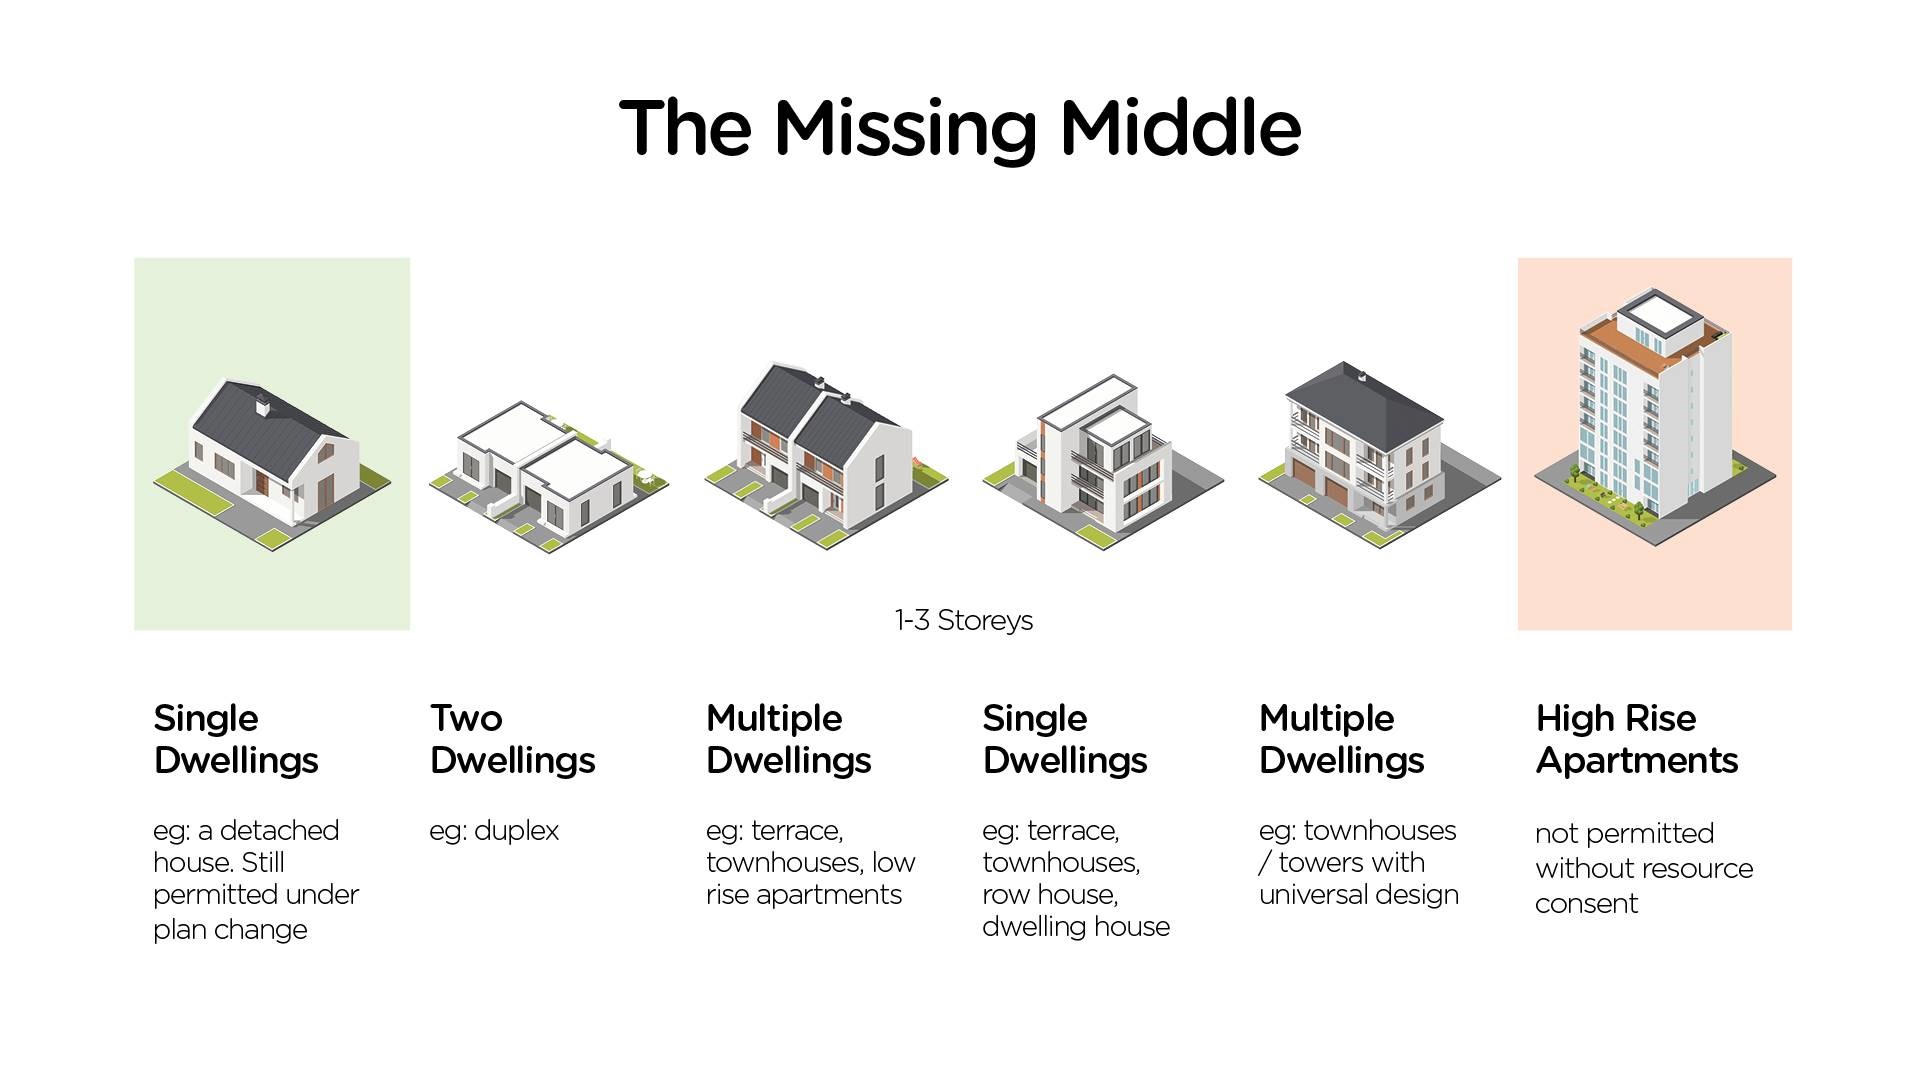 If single dwellings are one end of a sliding scale that has high-rise apartments at the other end, then other housing types are the missing middle.